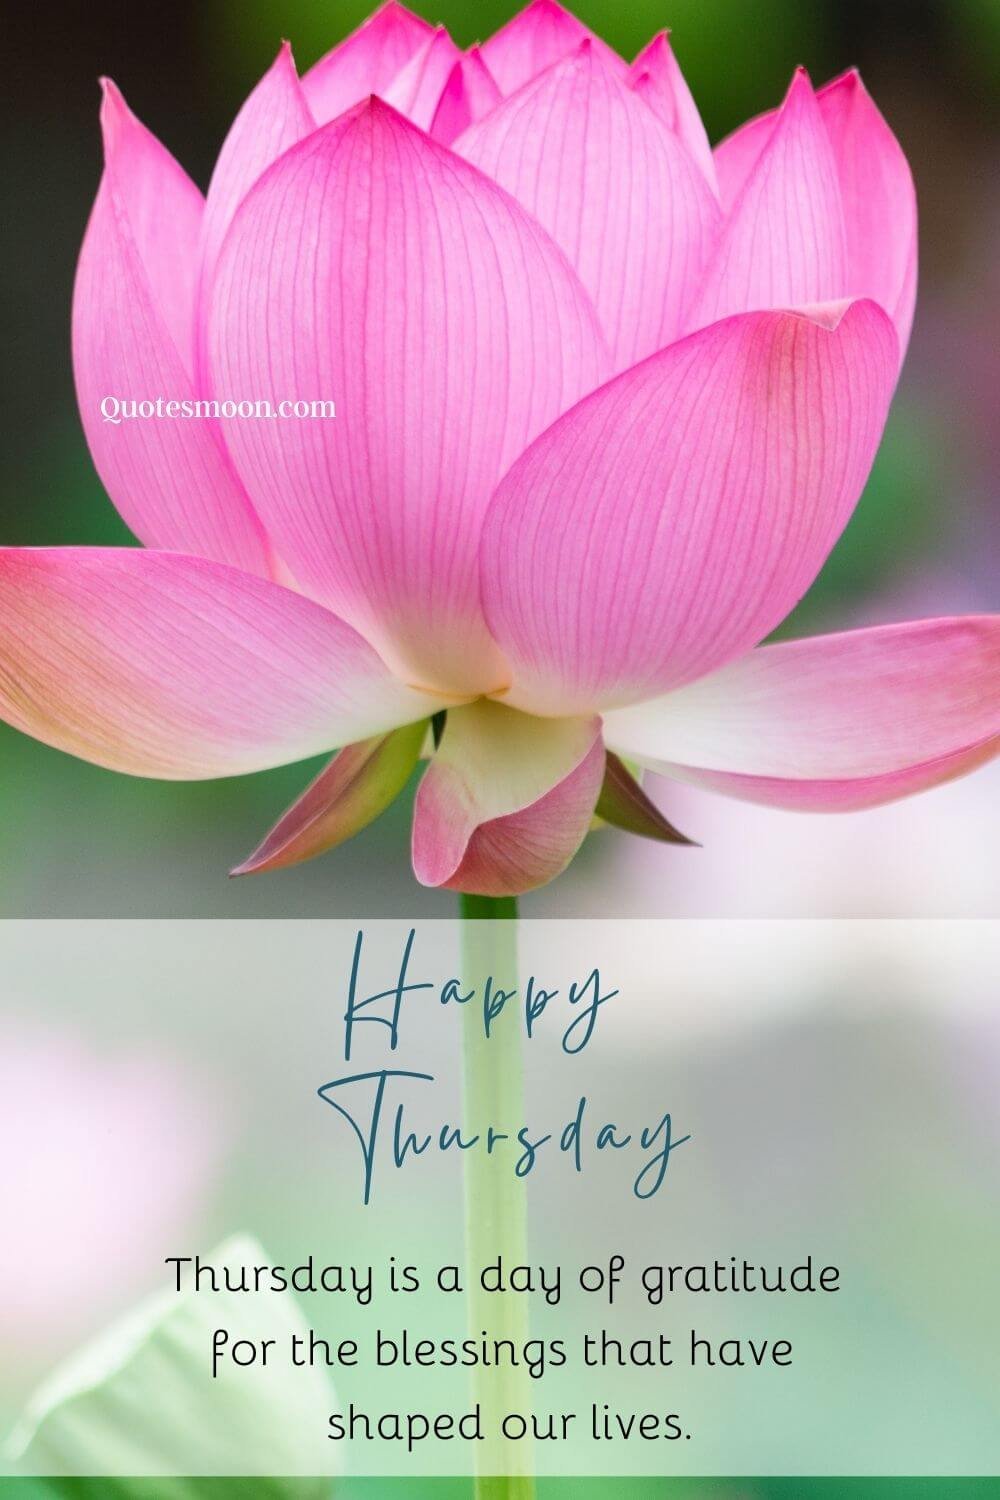 beautiful flowers thursday blessed wish image